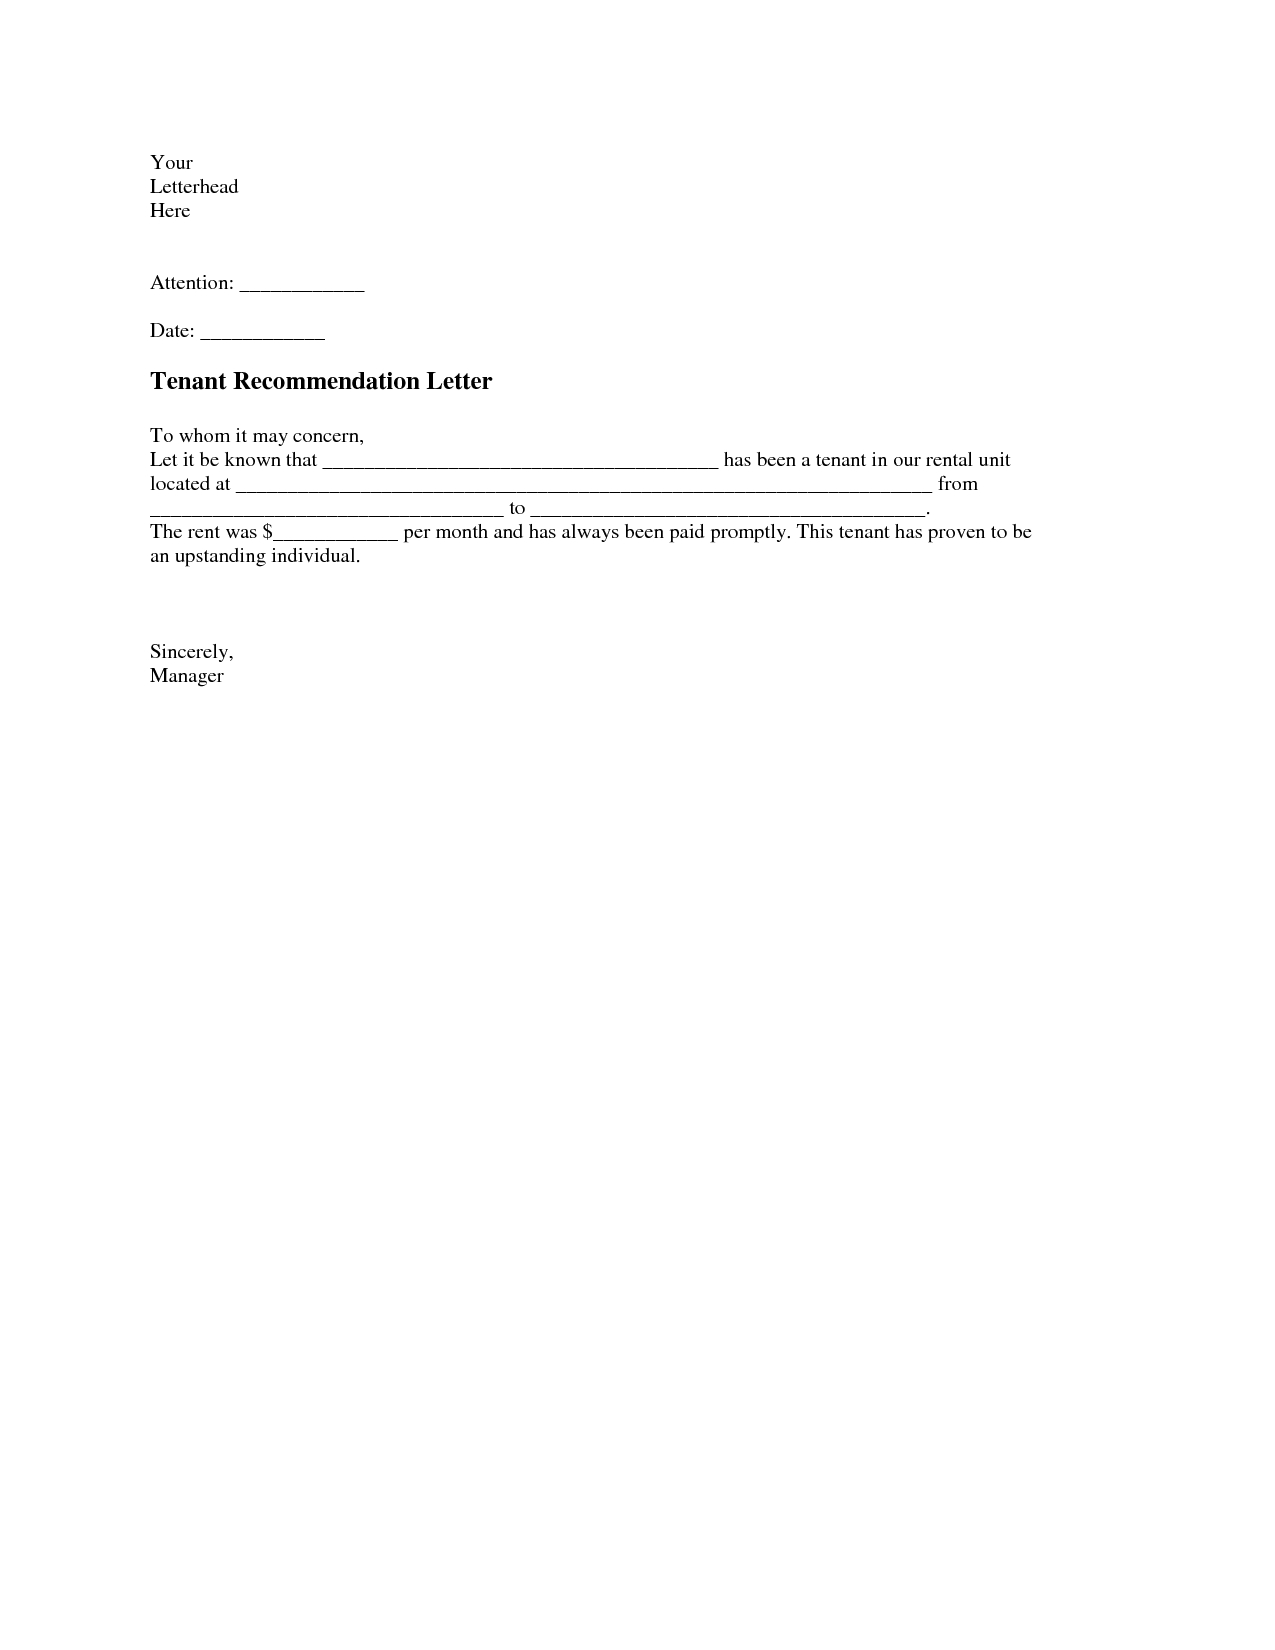 Rent Free Letter From Parents Template - Tenant Re Mendation Letter A Tenant Re Mendation Letter is